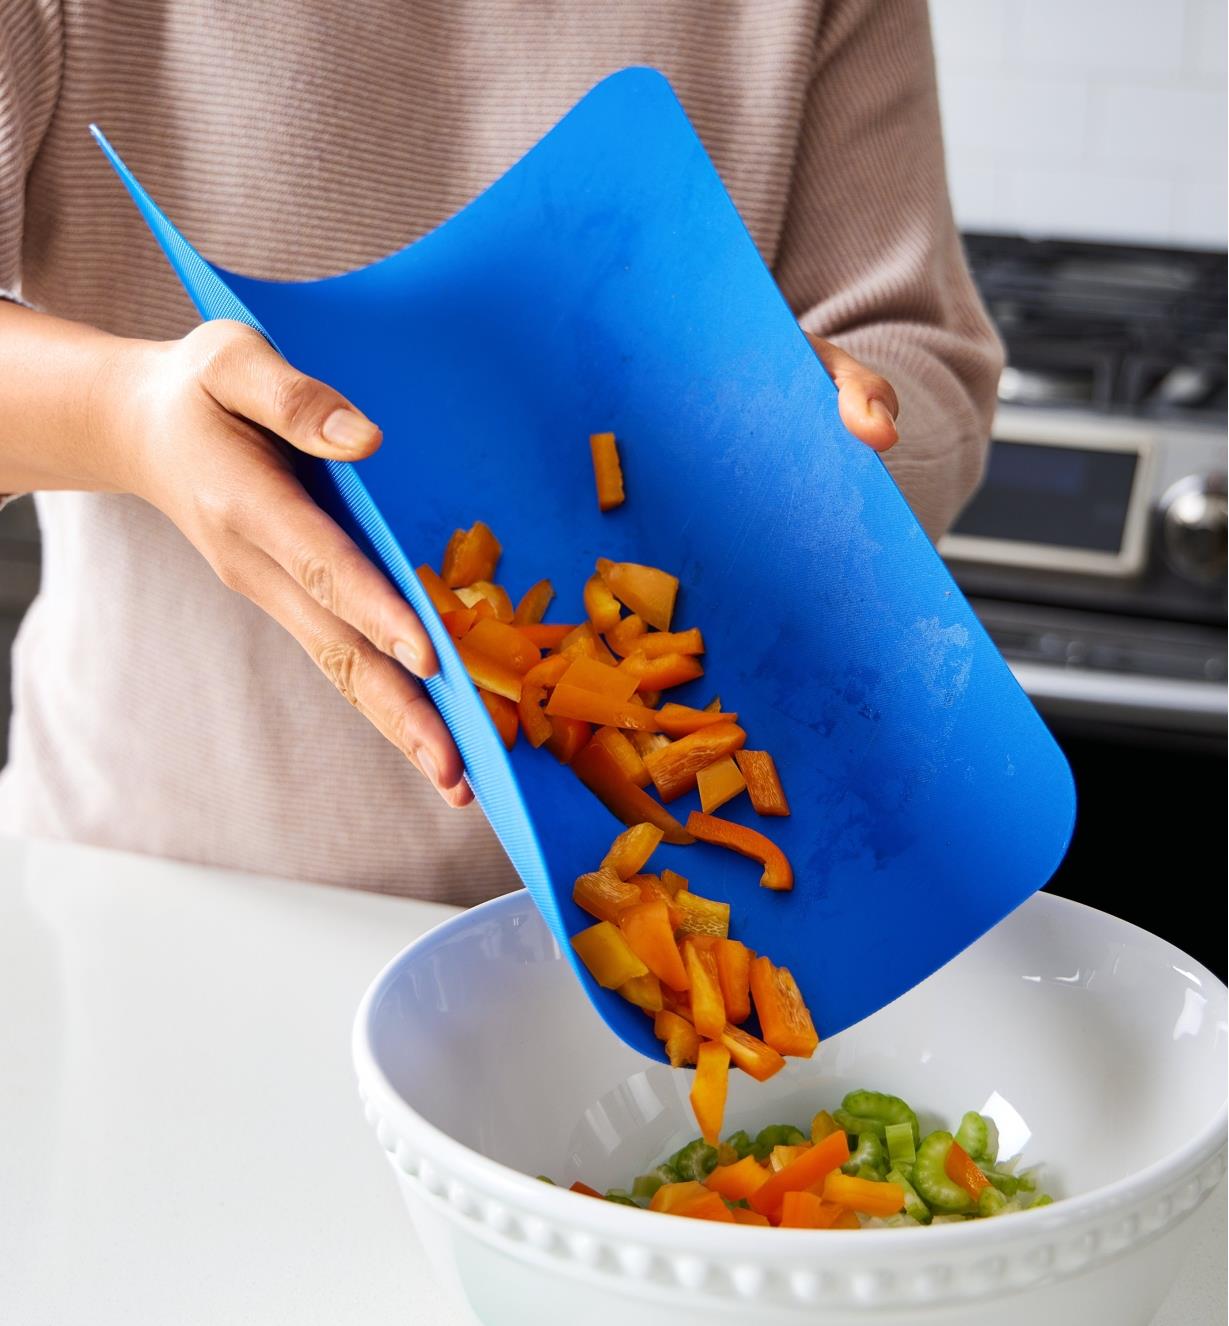 Transferring chopped food items from a flexible cutting mat to a bowl